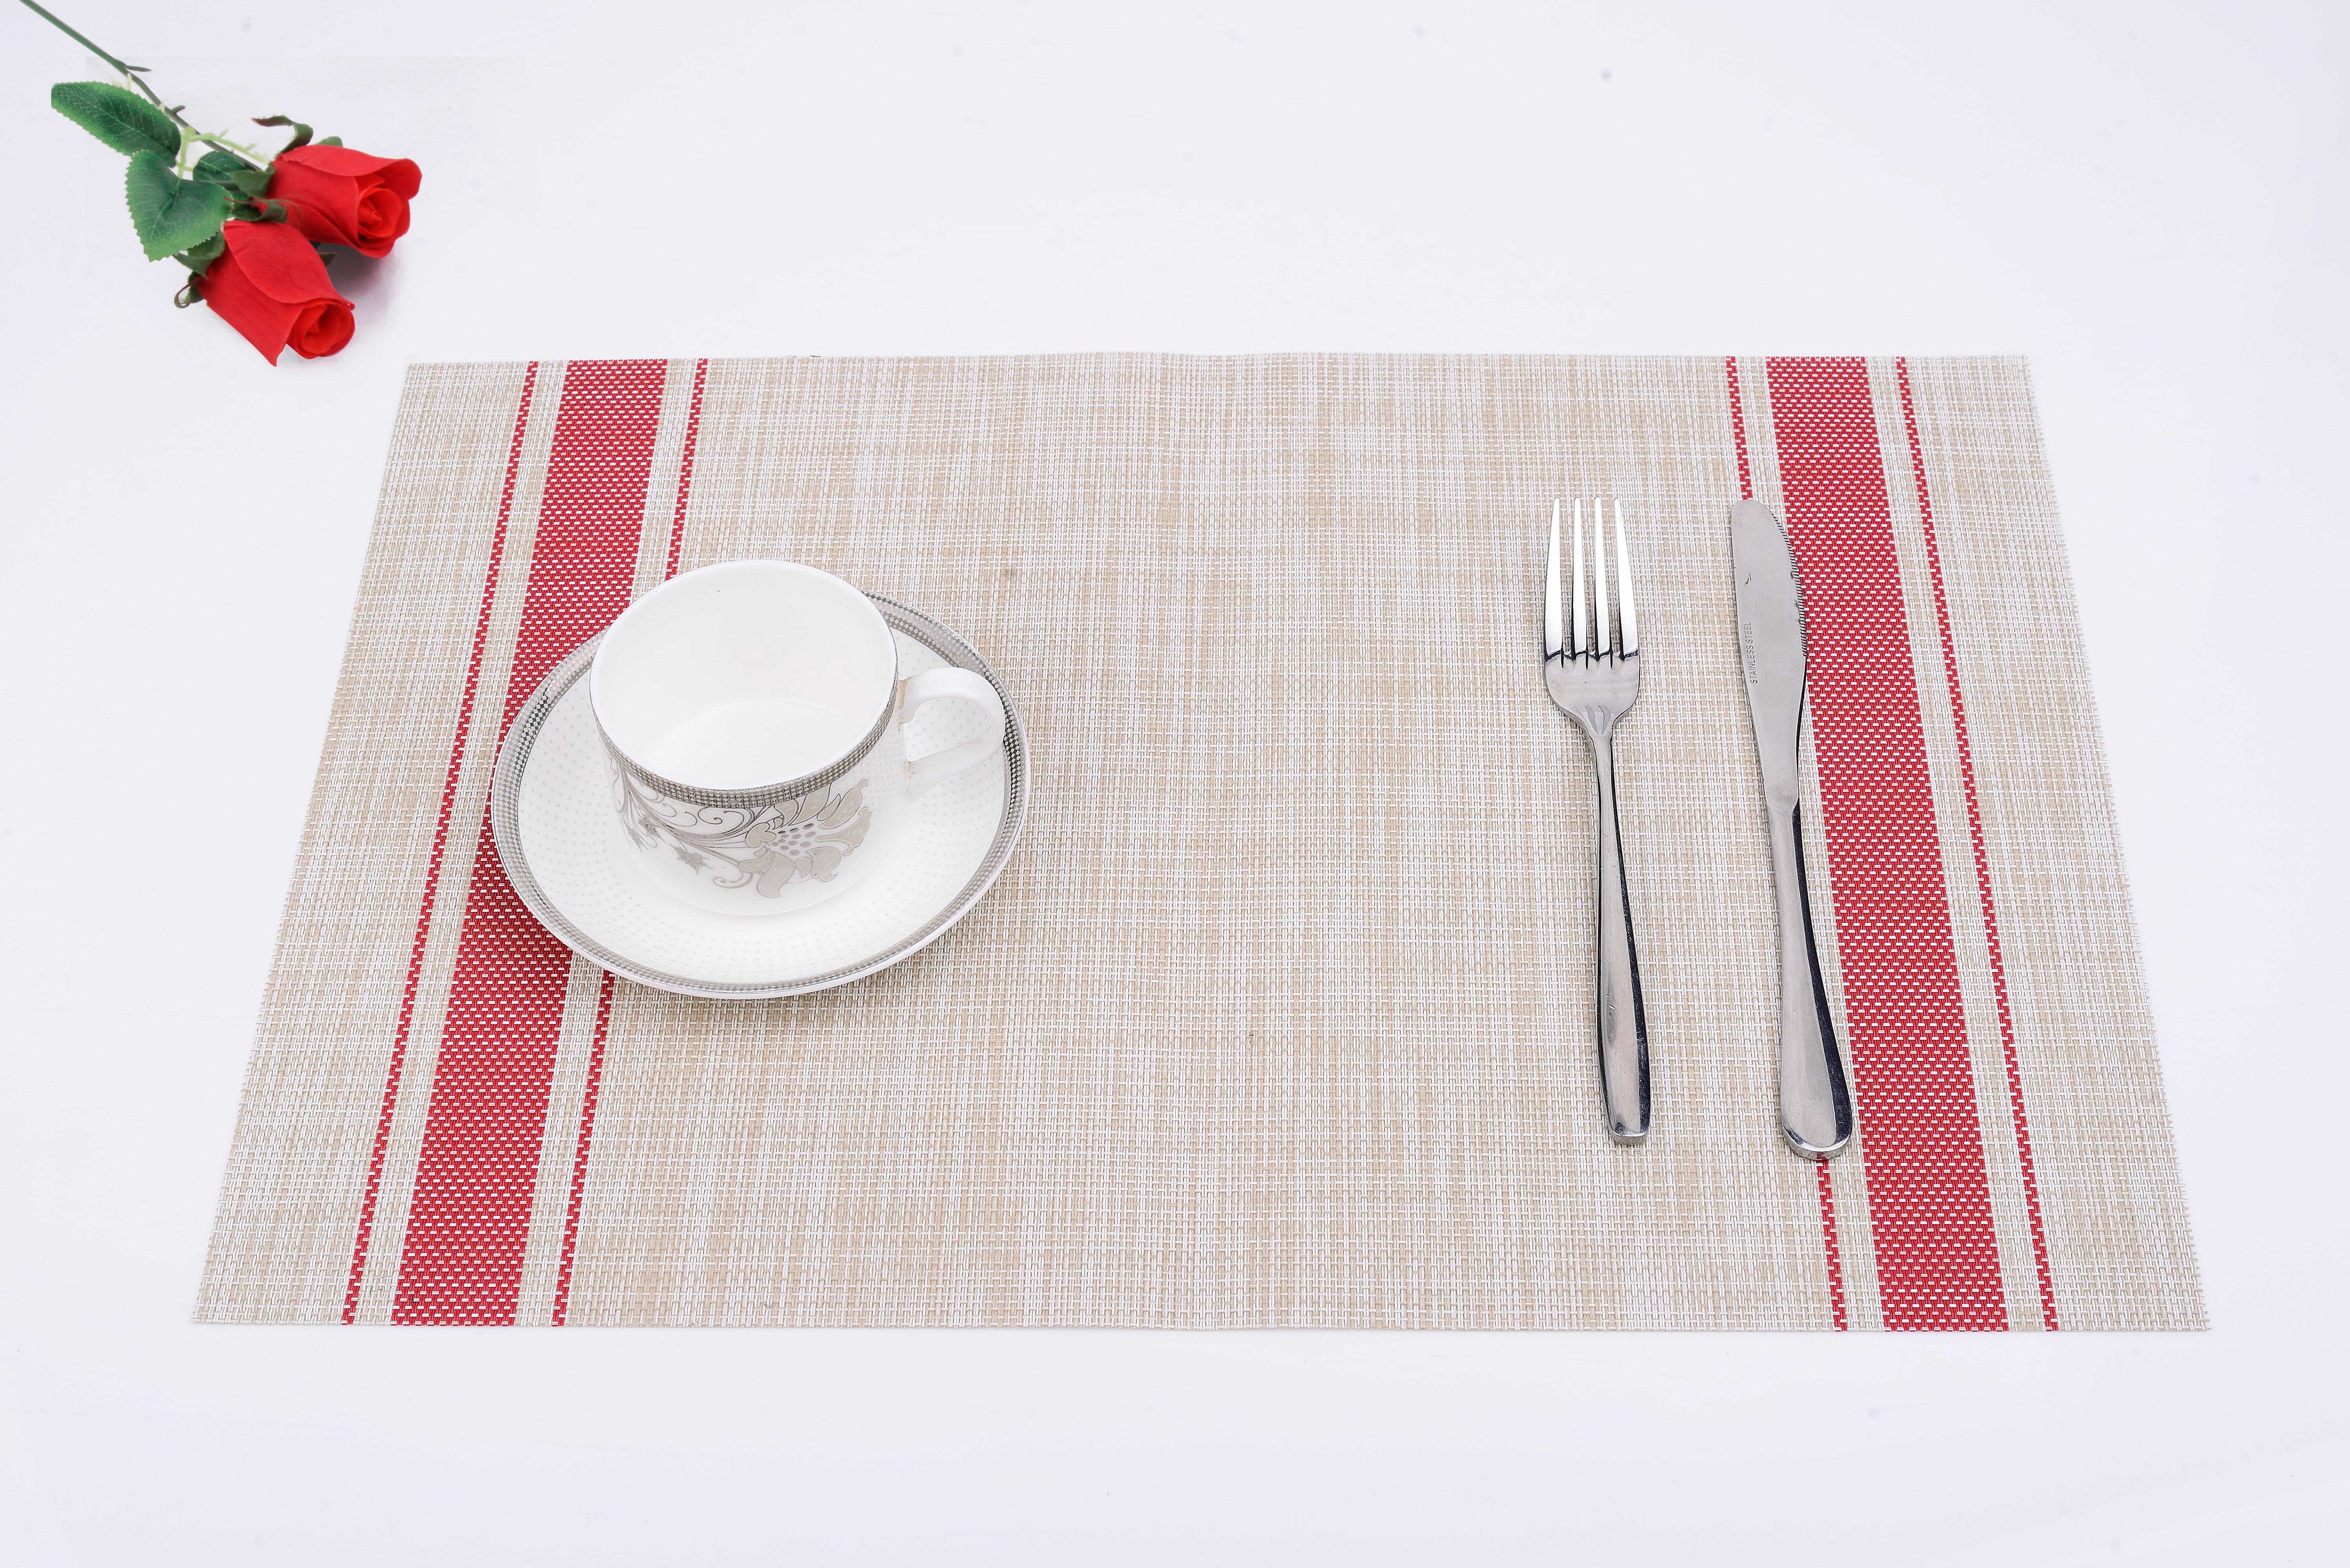 Set of 4 - 12" x 18" In. Woven Non-Slip Washable Placemats